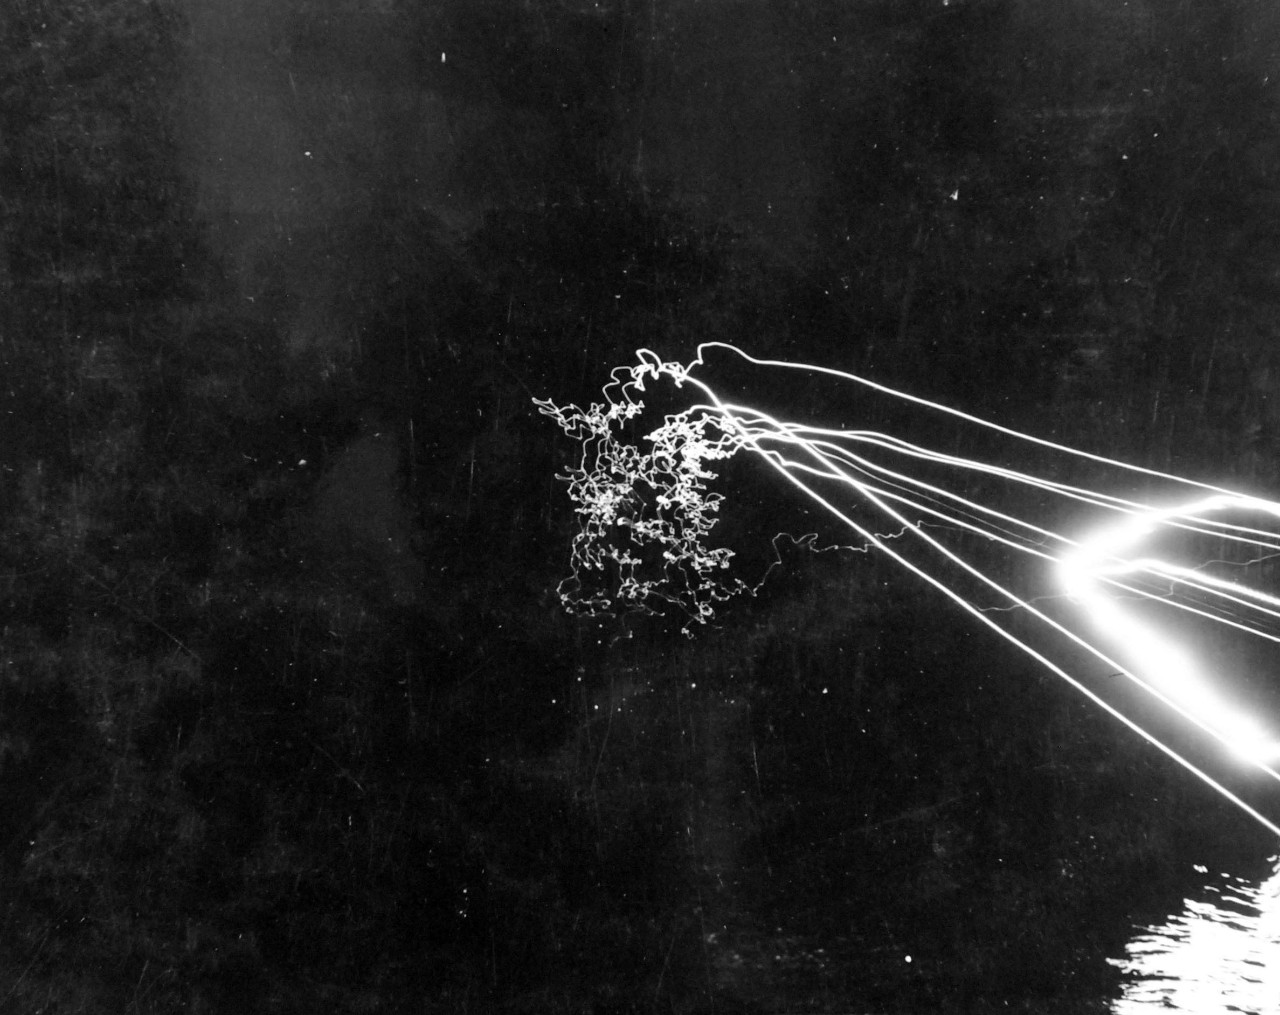 80-G-52861:  Battle of Kula Gulf, July 5-6, 1943.   Night-firing during the battle showing traces from guns.   Photographed from USS Honolulu (CL-48).  Official U.S. Navy Photograph, now in the collections of the National Archives.  (2018/04/04).  